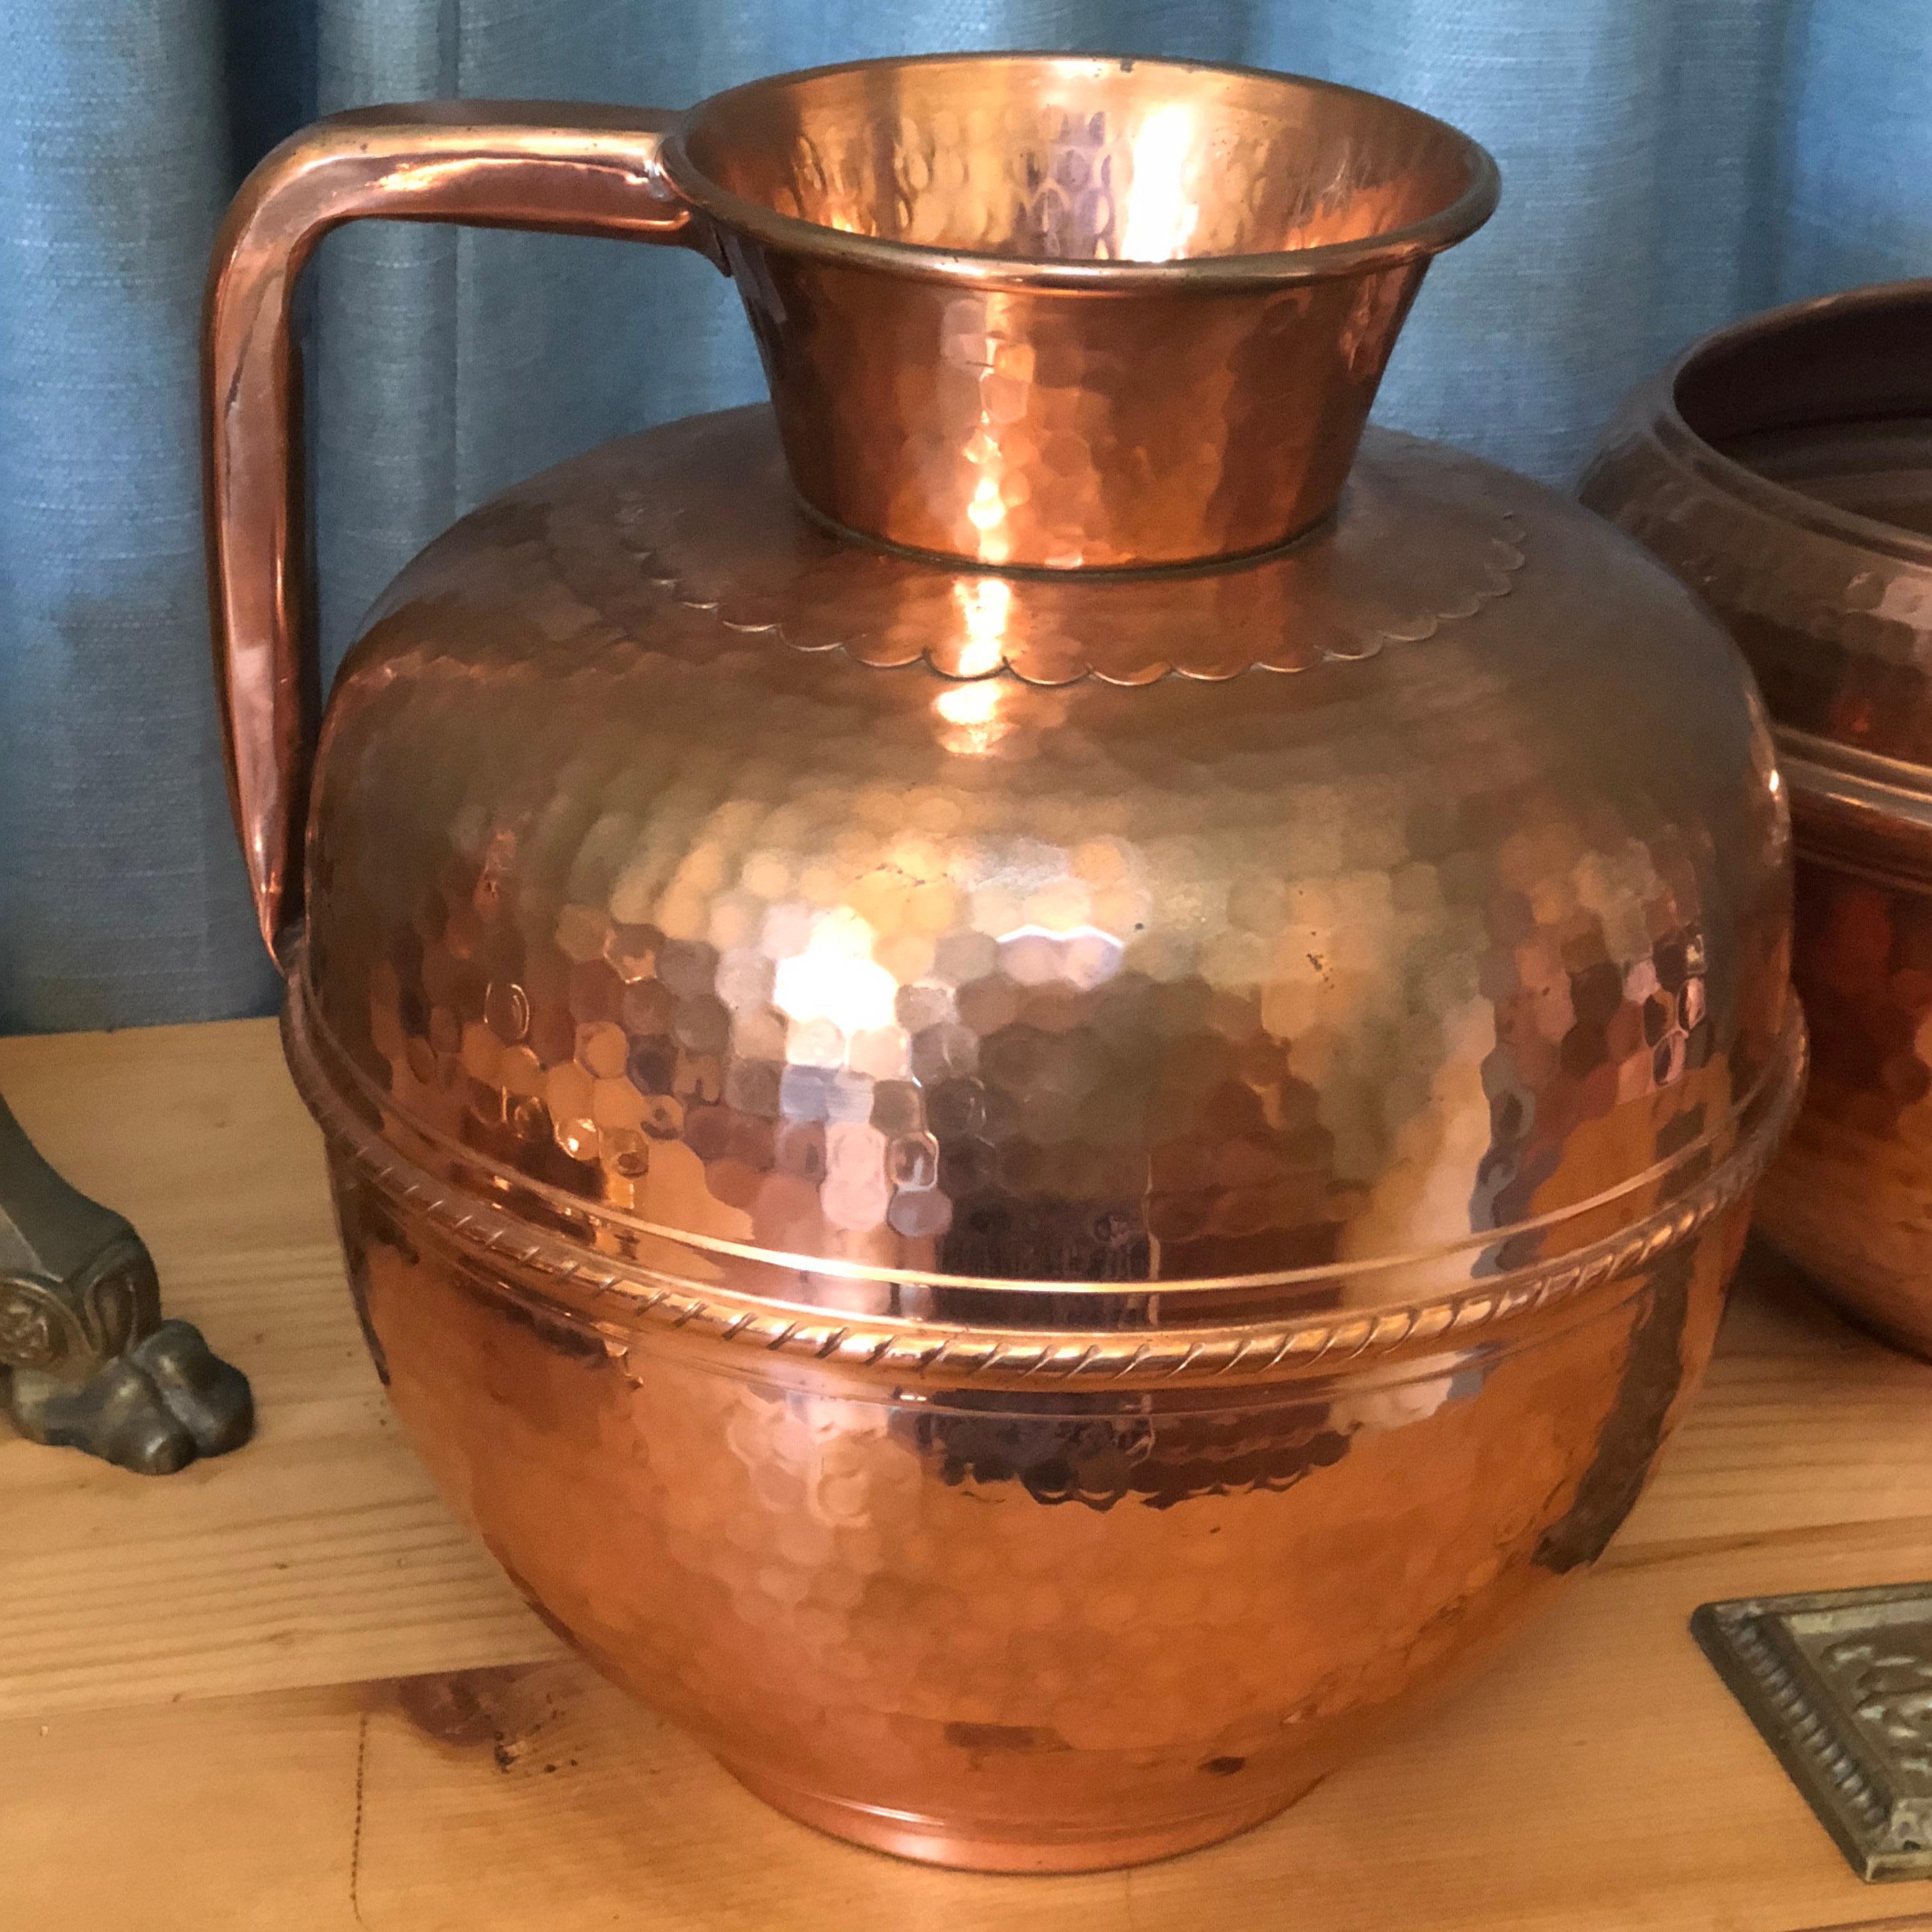 This exceptional condition French hammered copper pitcher, features a lovely plaited, handcrafted copper mid section, and large handle. The makers hallmark from France, is stamped on the base of the pitcher. This piece has a matching French hammered